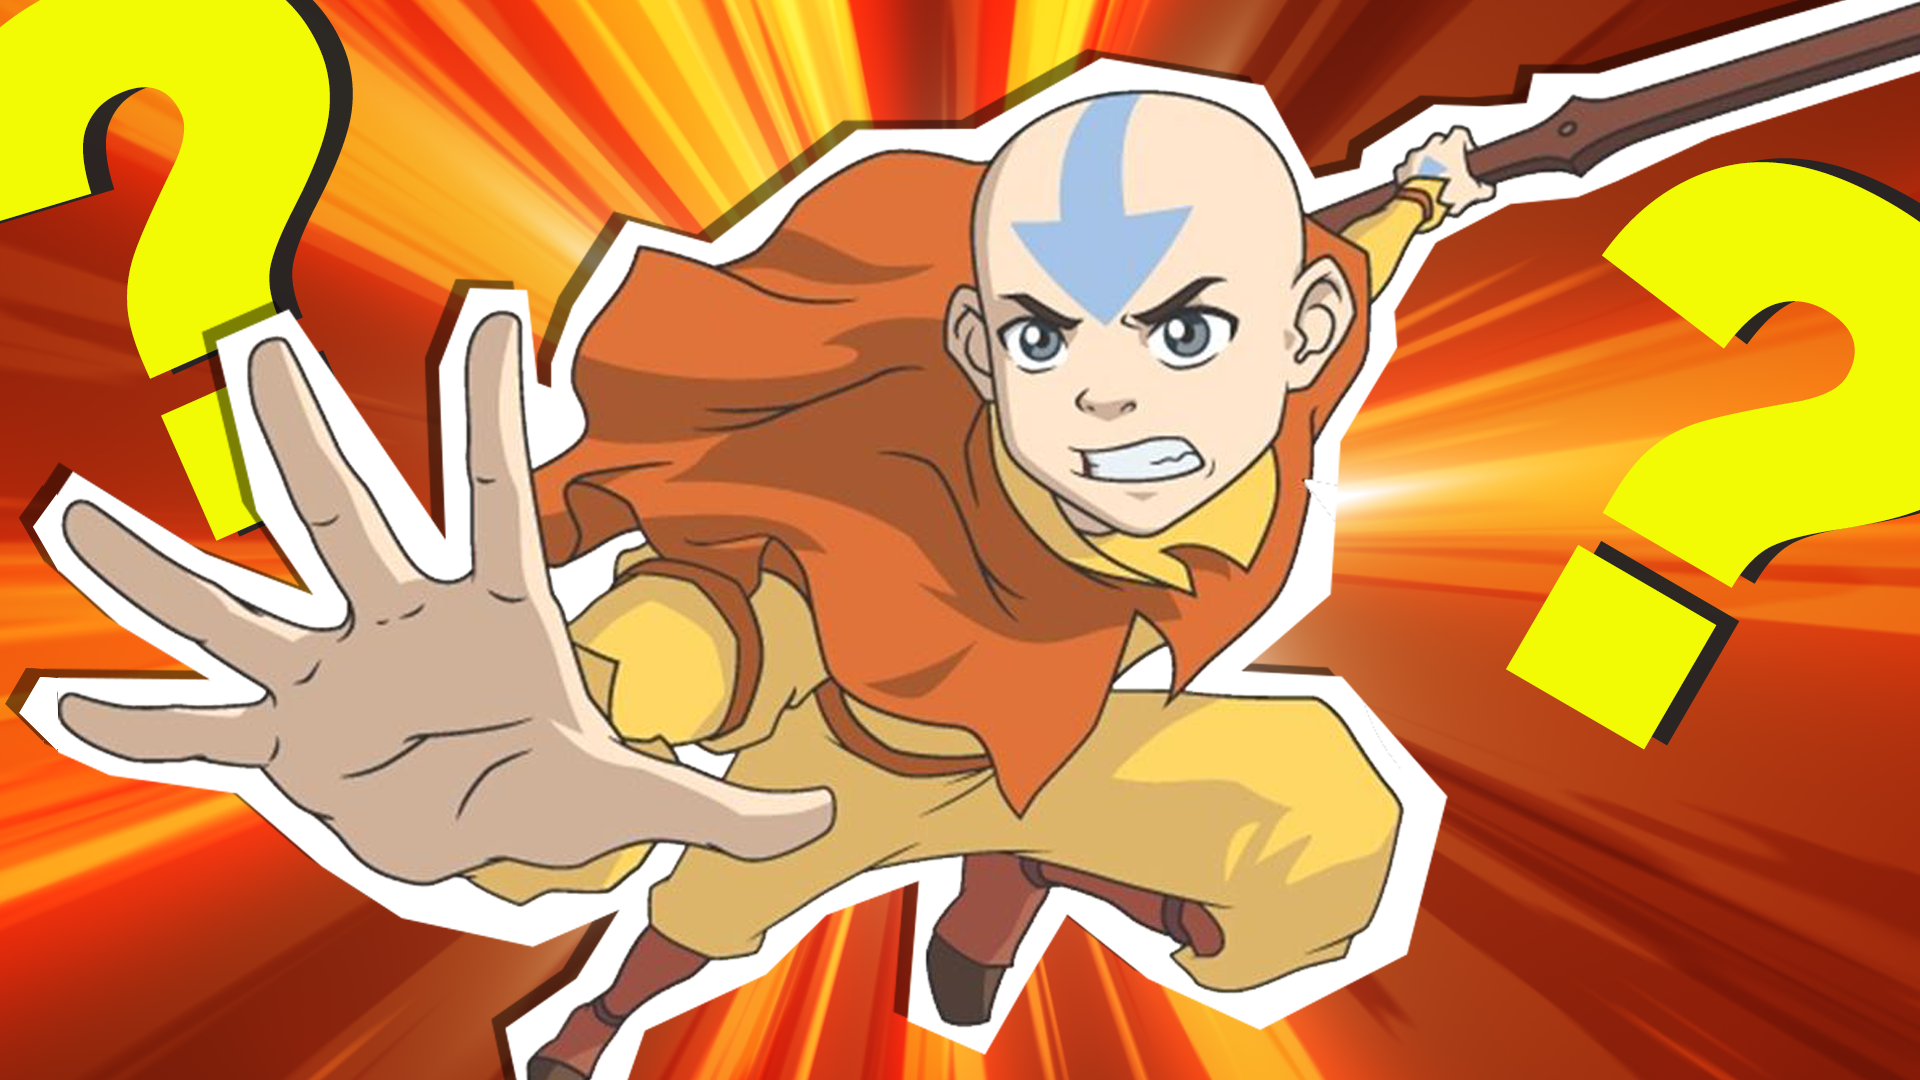 Ang from Avatar: The Last Airbender